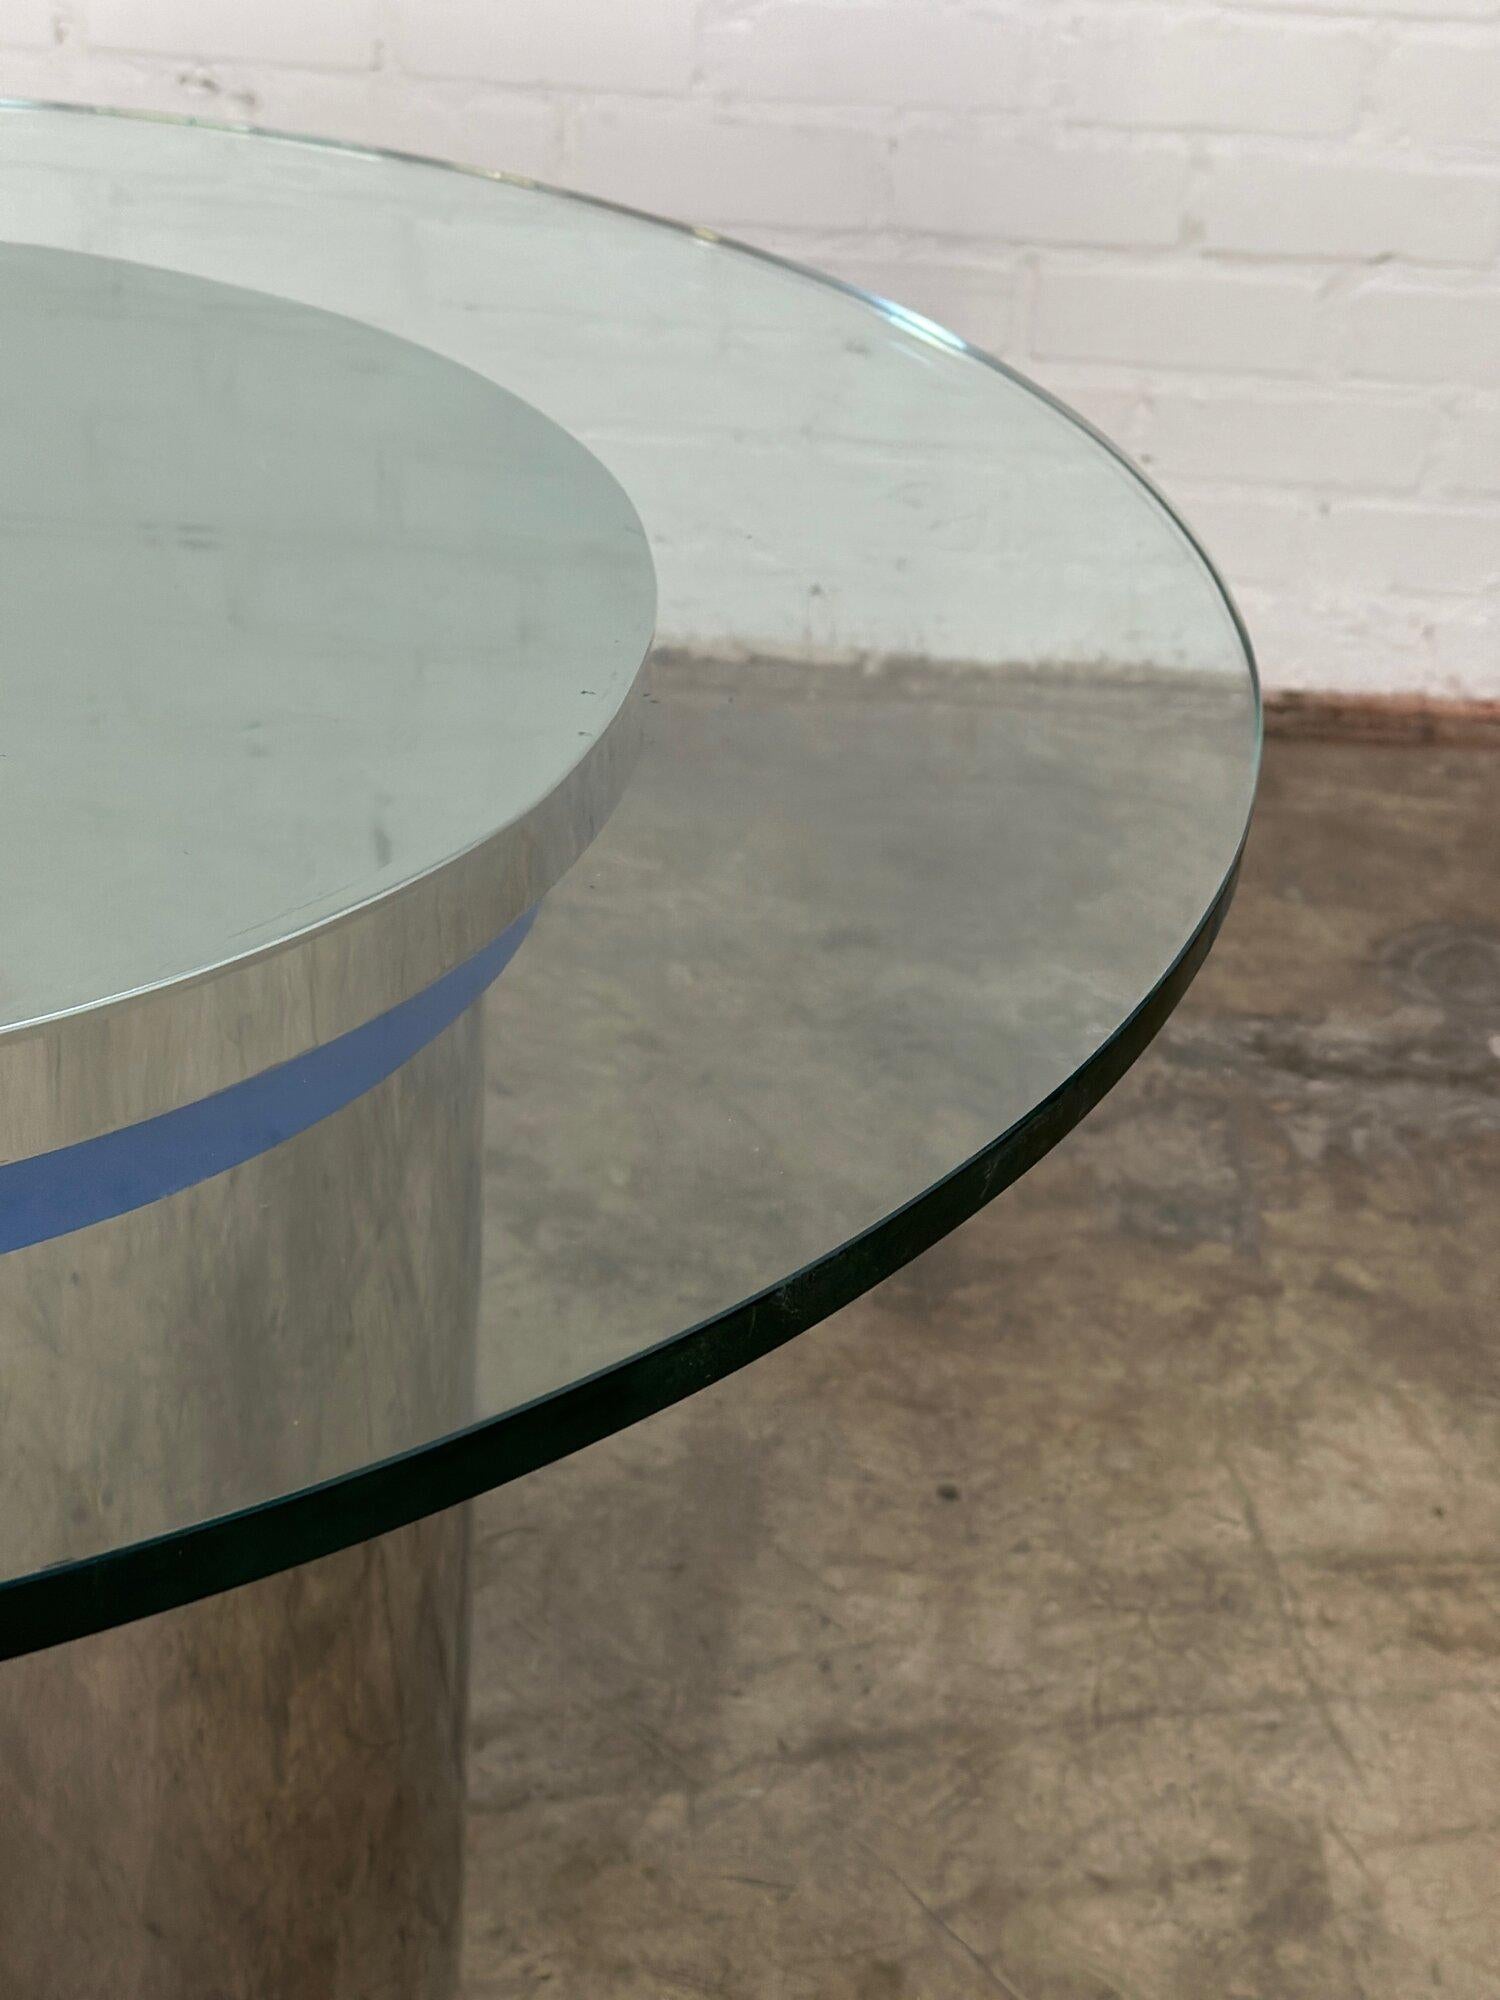 W42 D42 H30.5

VIntage chrome dining table with a blue chrome trim edge. Chrome base and glass show well with no major areas of wear, no chips in glass or peeling in chrome. Minor surface scrathces have been shown closely. 